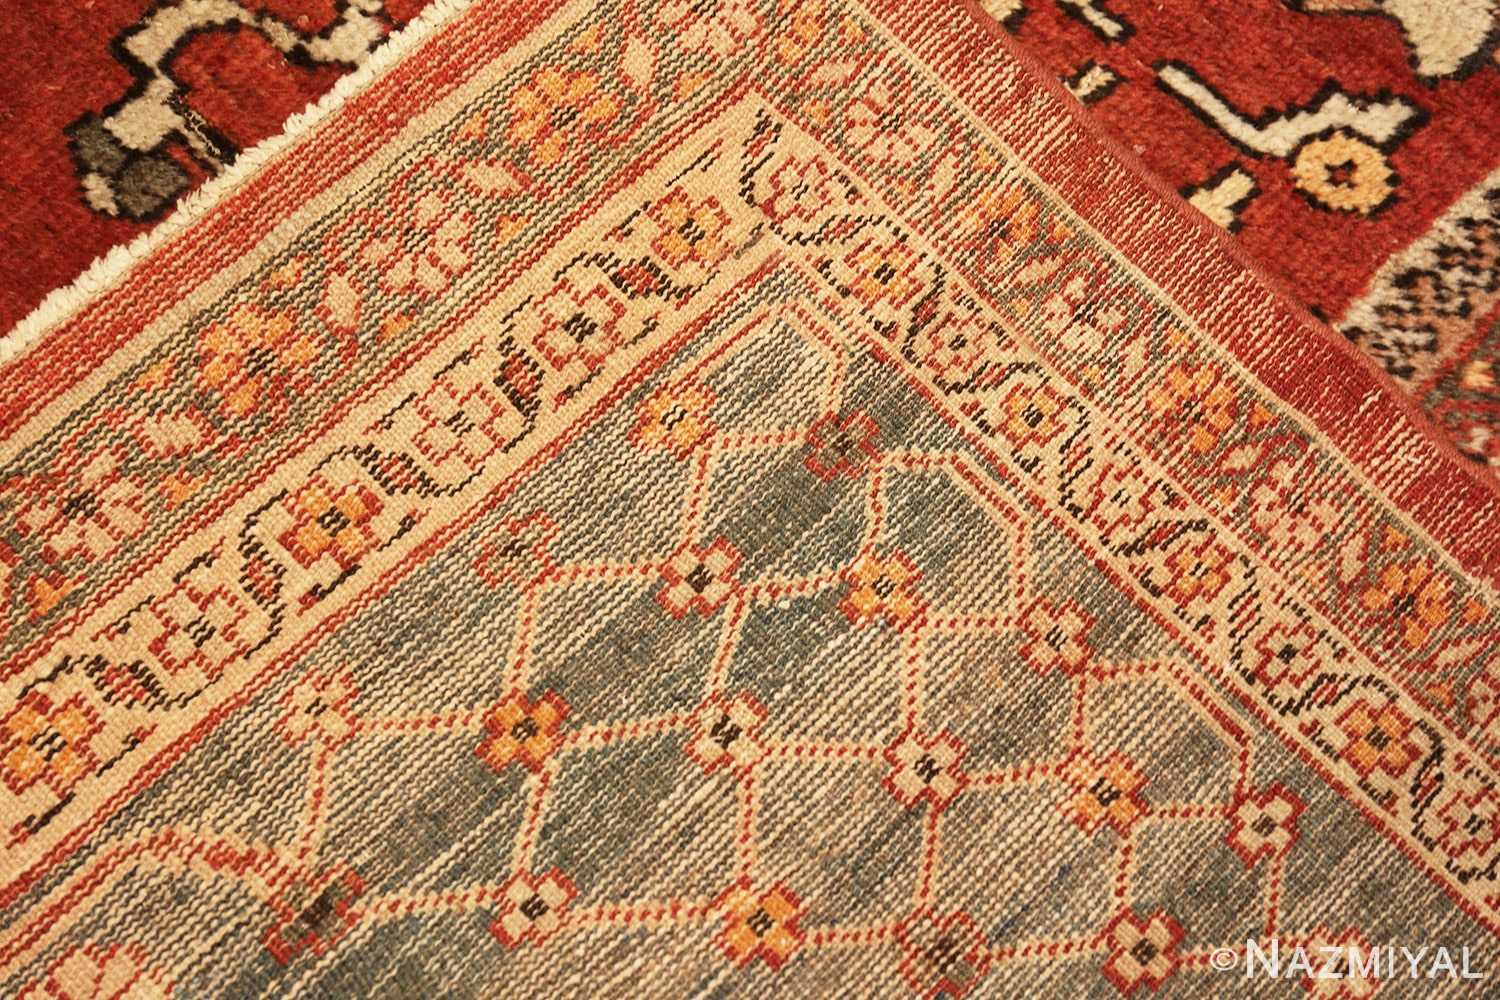 Weave of Large Rustic Antique Persian Sultanabad Carpet 70279 from Nazmiyal Antique Rugs in NYC